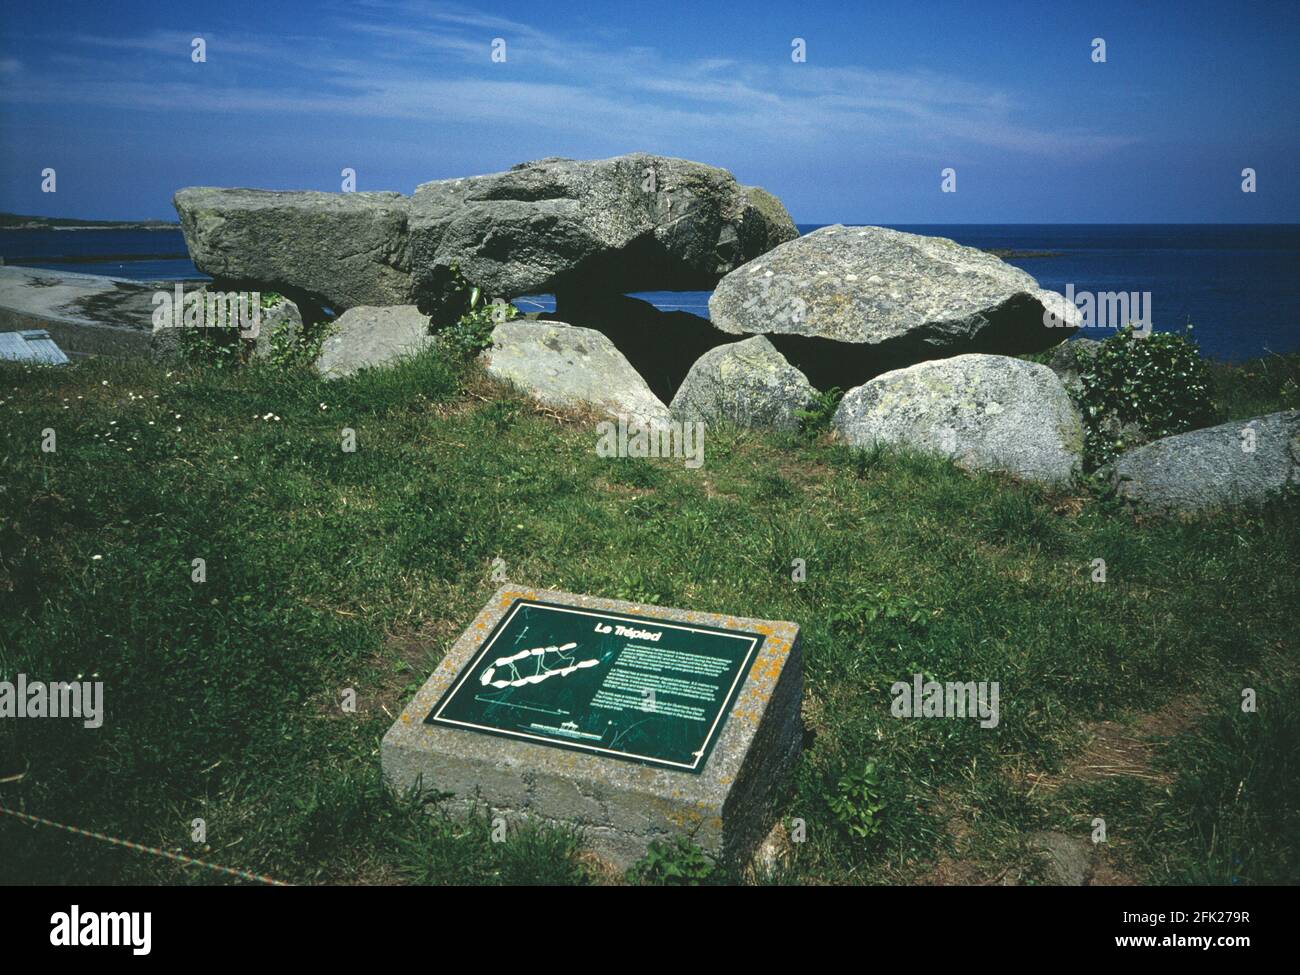 Kanalinseln. Guernsey. La Rocques. Le Trepied Megalithische Grabkammer. Stockfoto